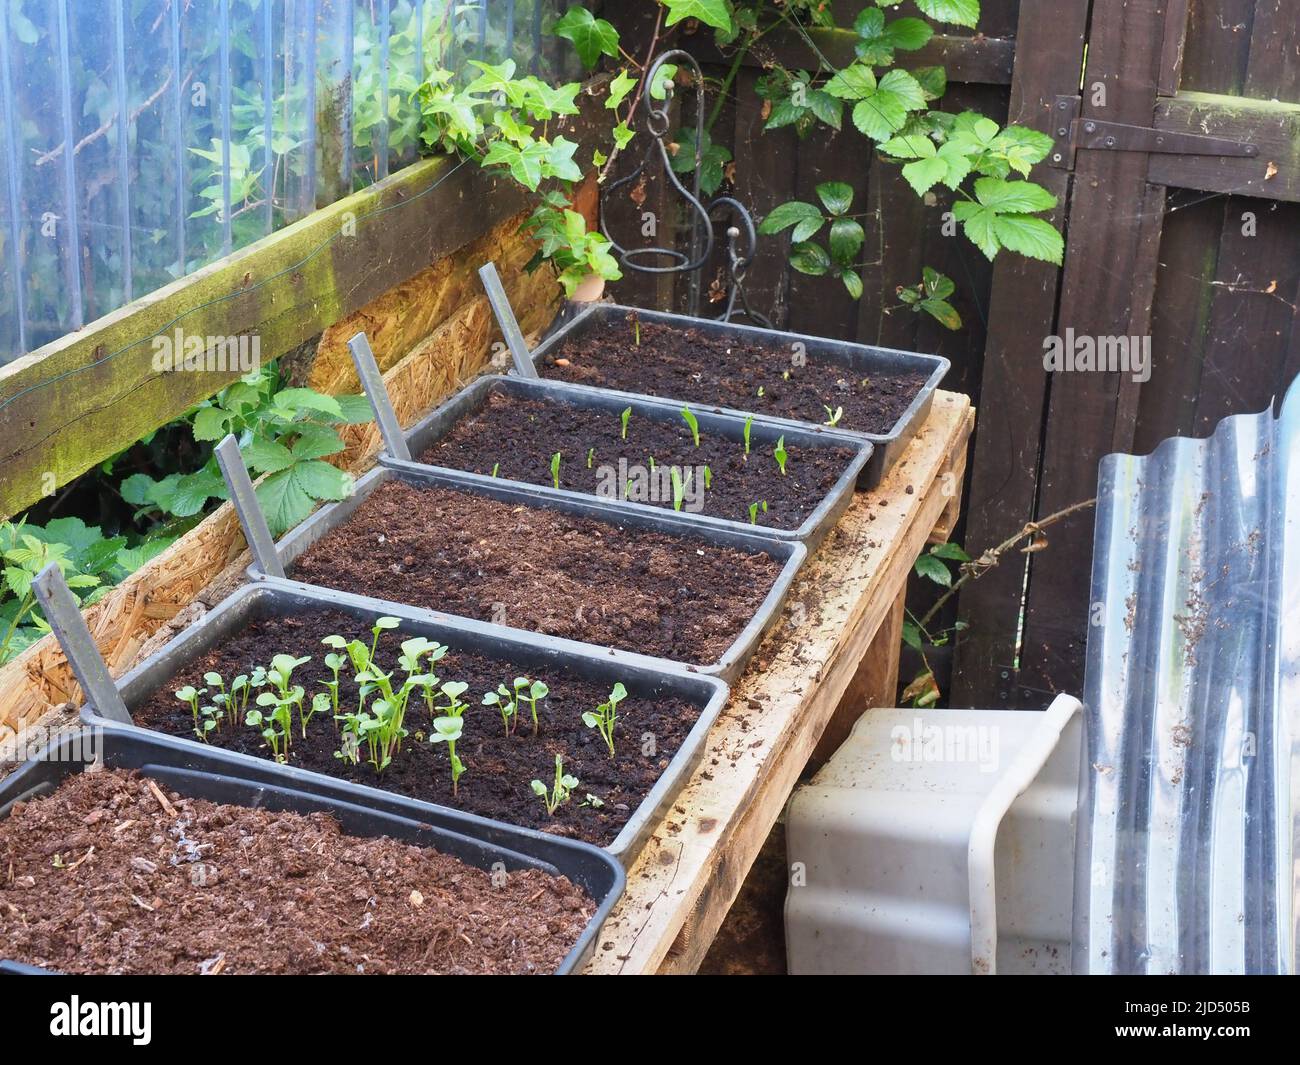 Seeds sprouting in seed trays in a greenhouse Stock Photo